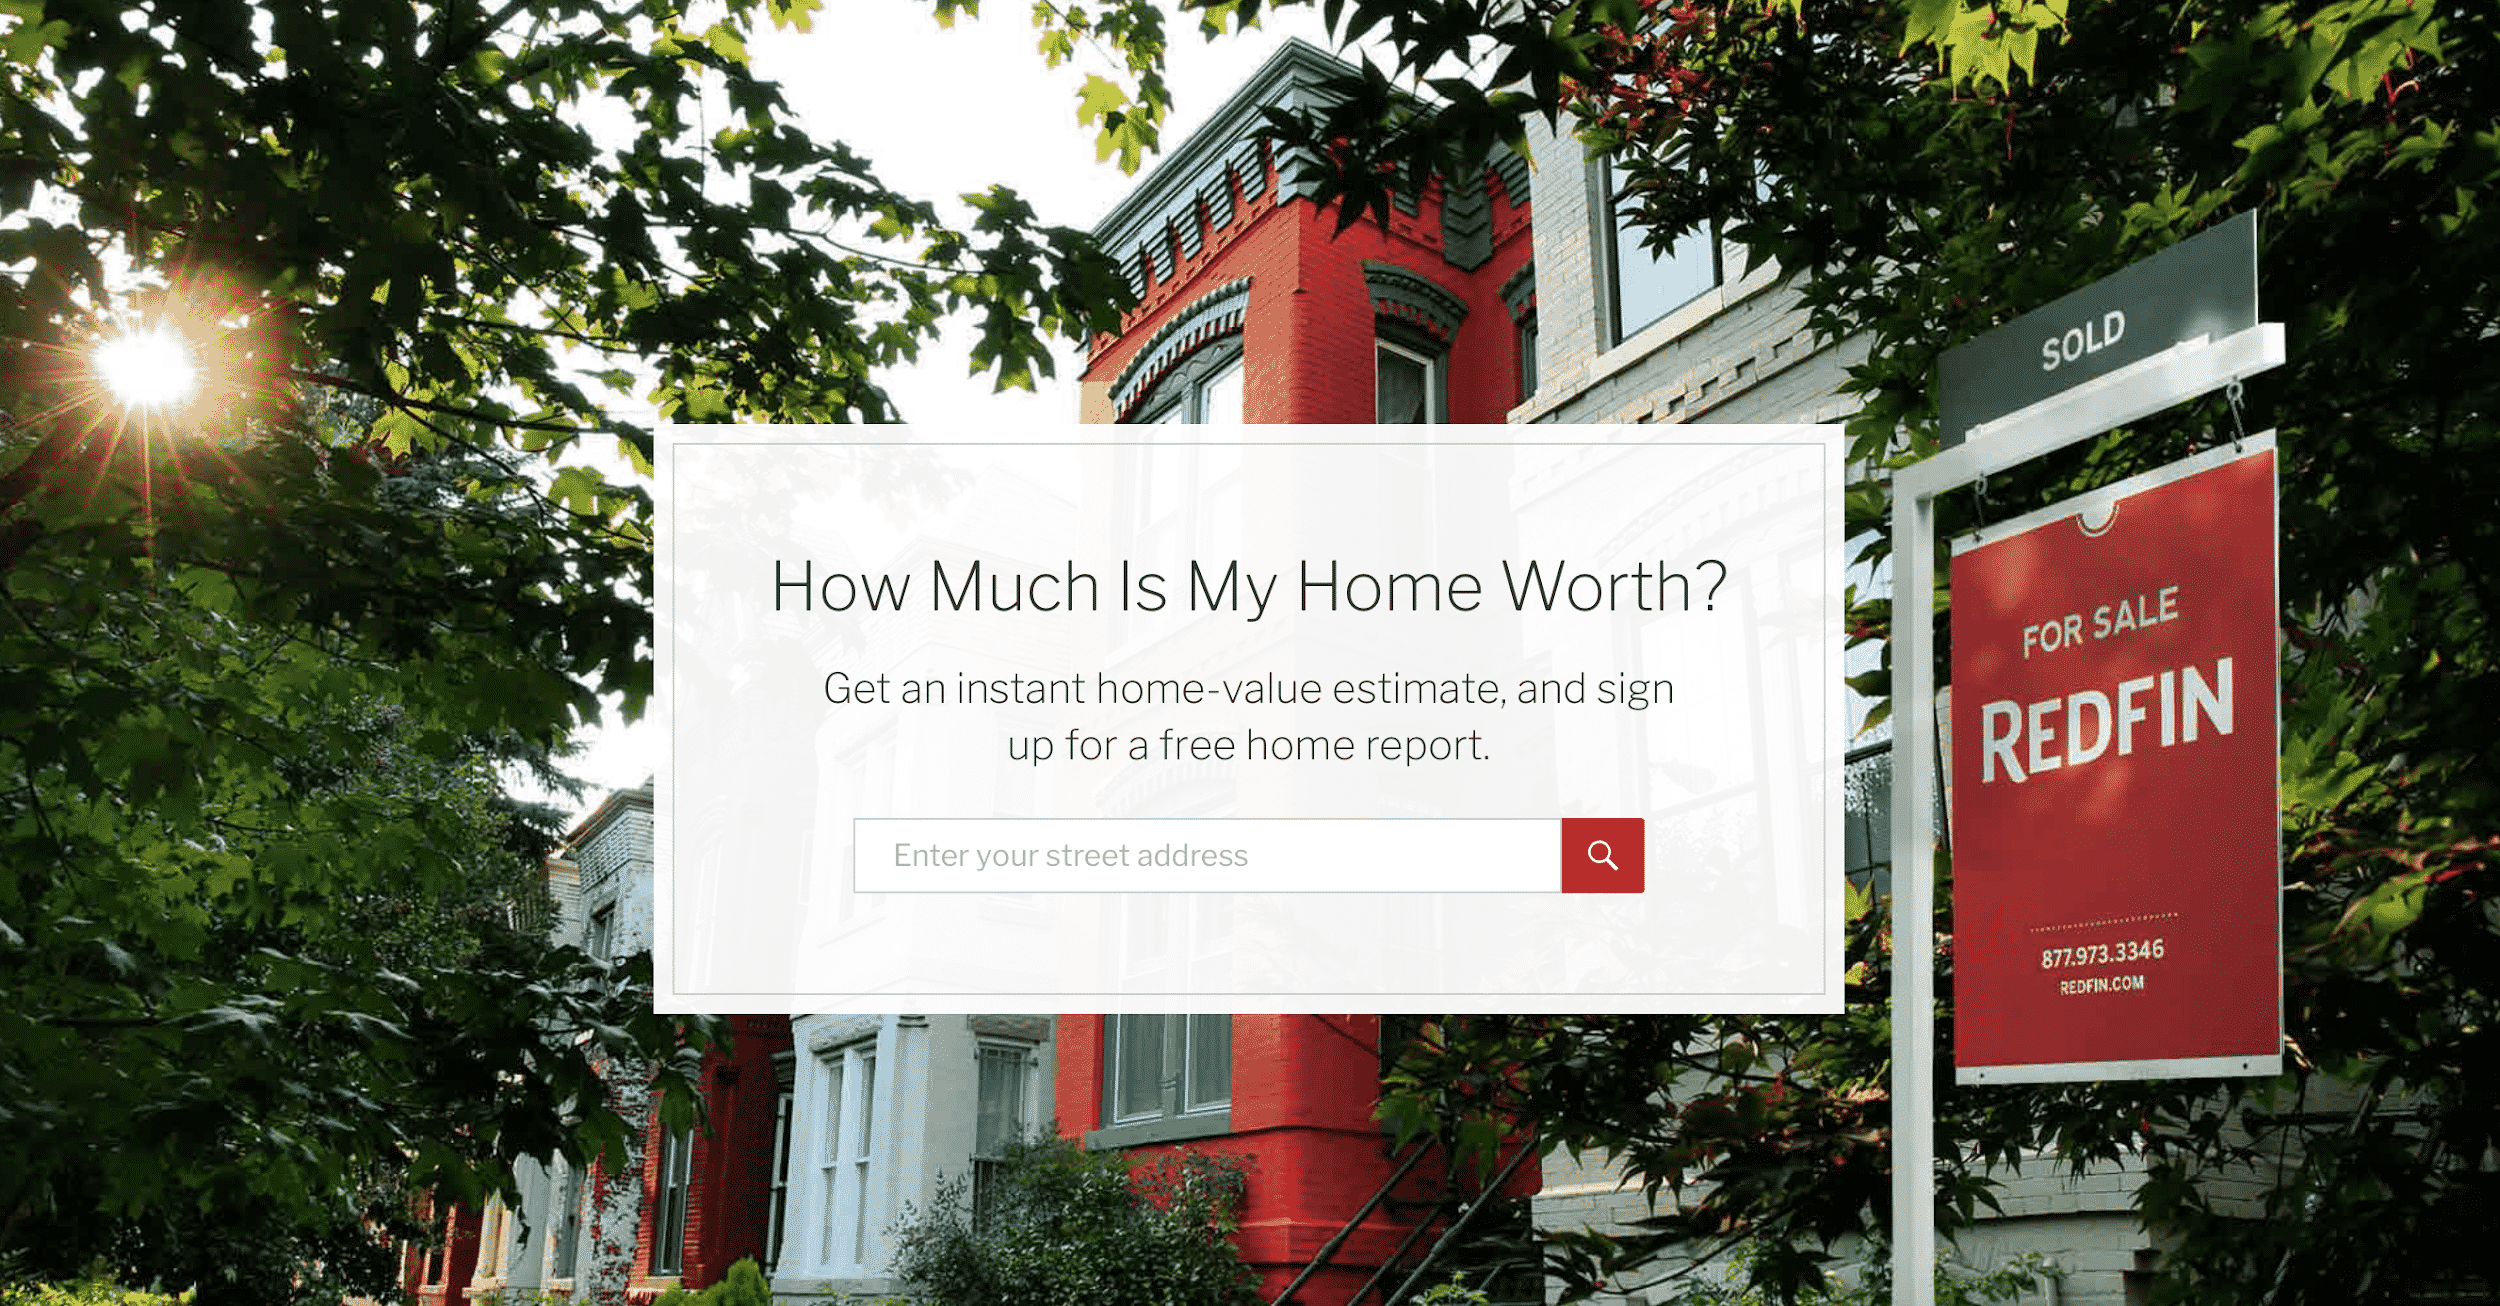 Redfin’s Home Valuation landing page